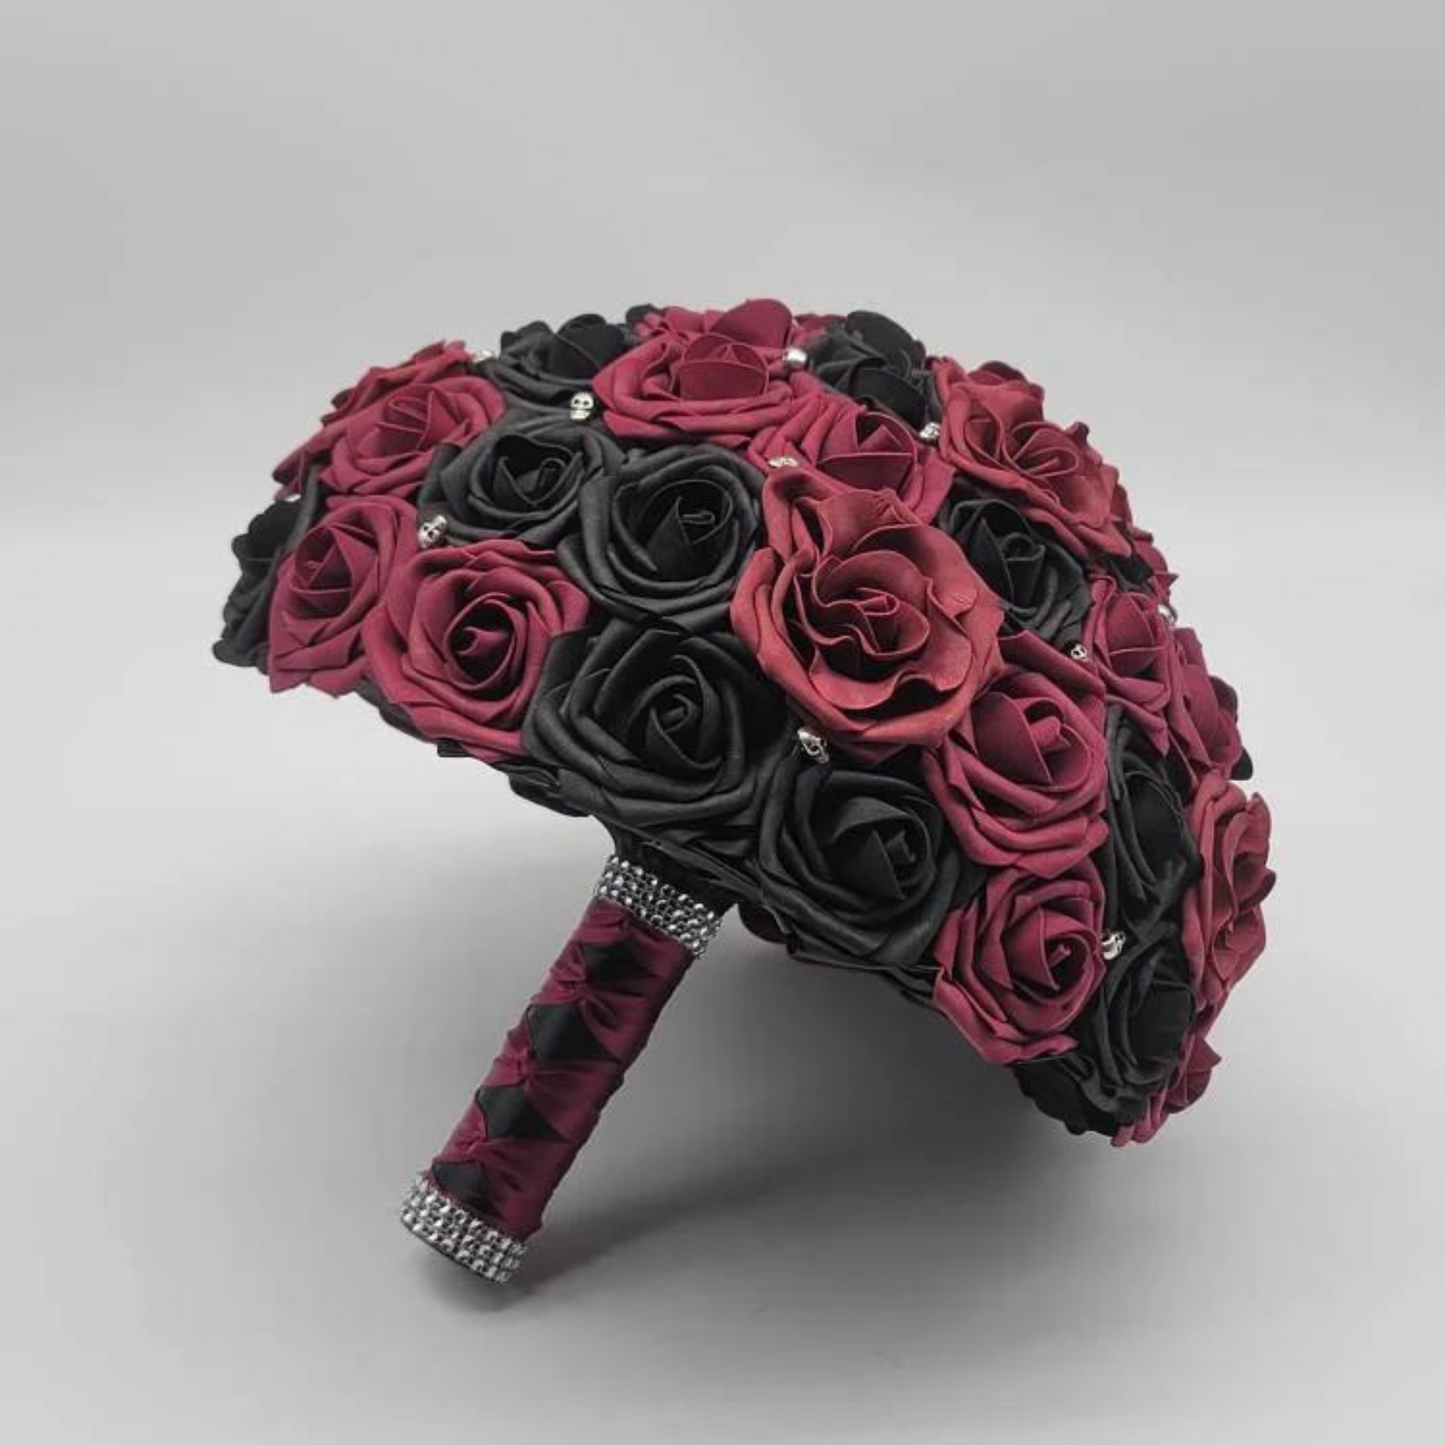 burgundy and black bridal bouquet with silver skulls